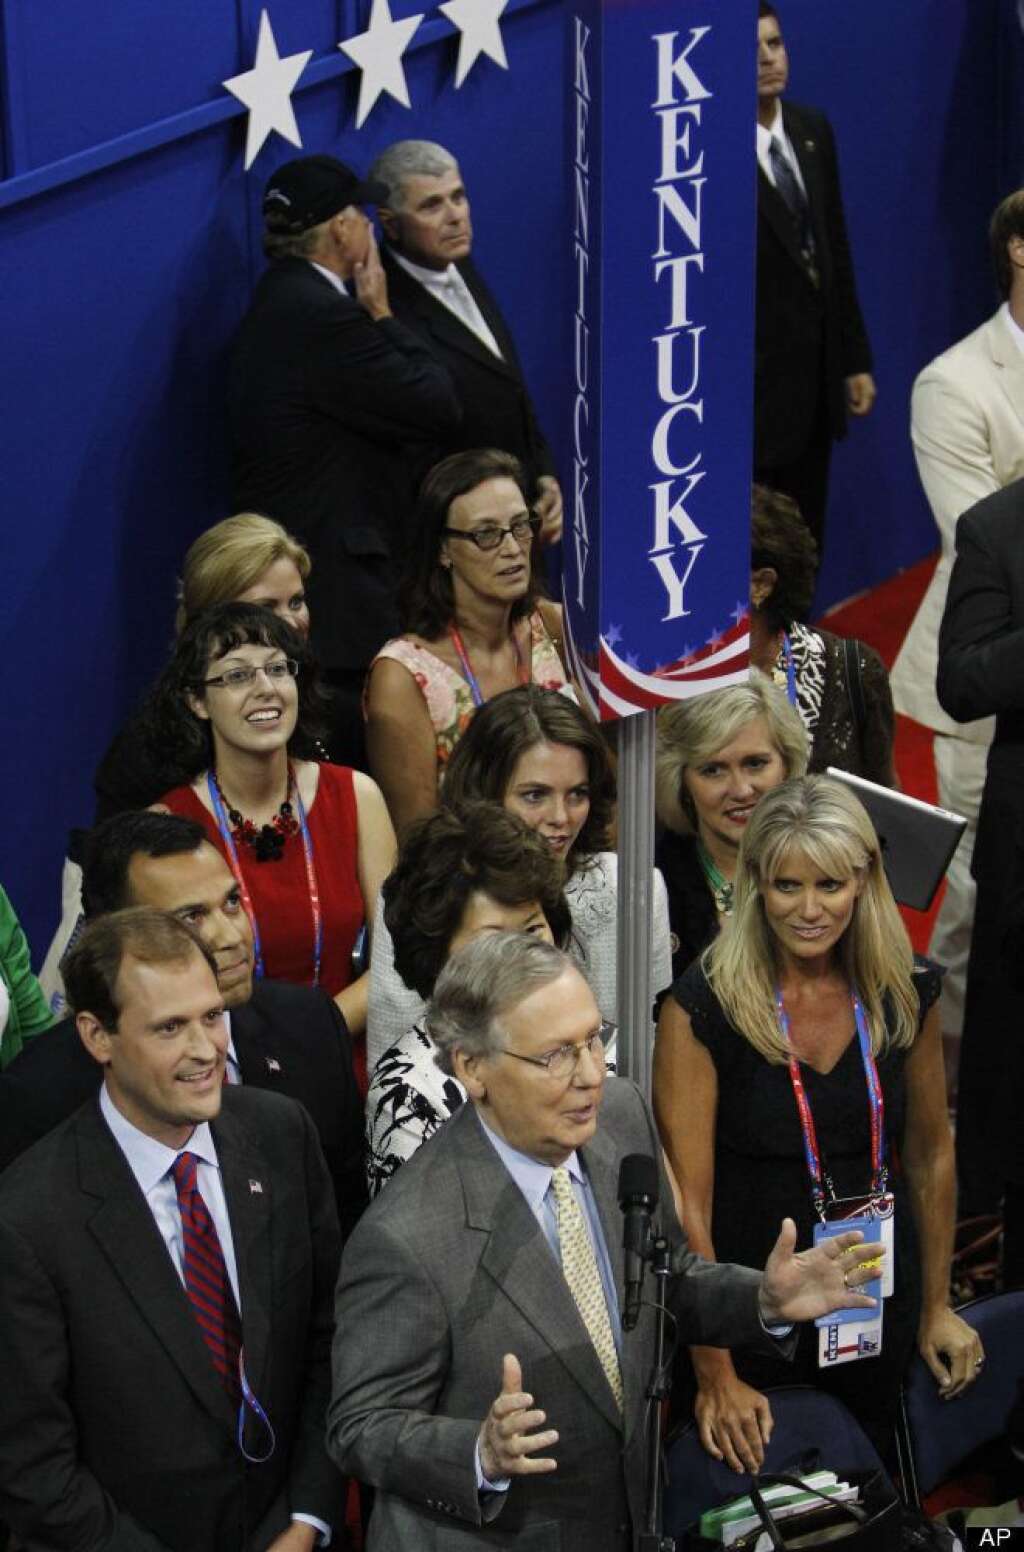 Delegates from Kentucky casts their votes for presidential candidate Mitt Romney during the Republican National Convention in Tampa, Fla., on Tuesday, Aug. 28, 2012. (AP Photo/Lynne Sladky)